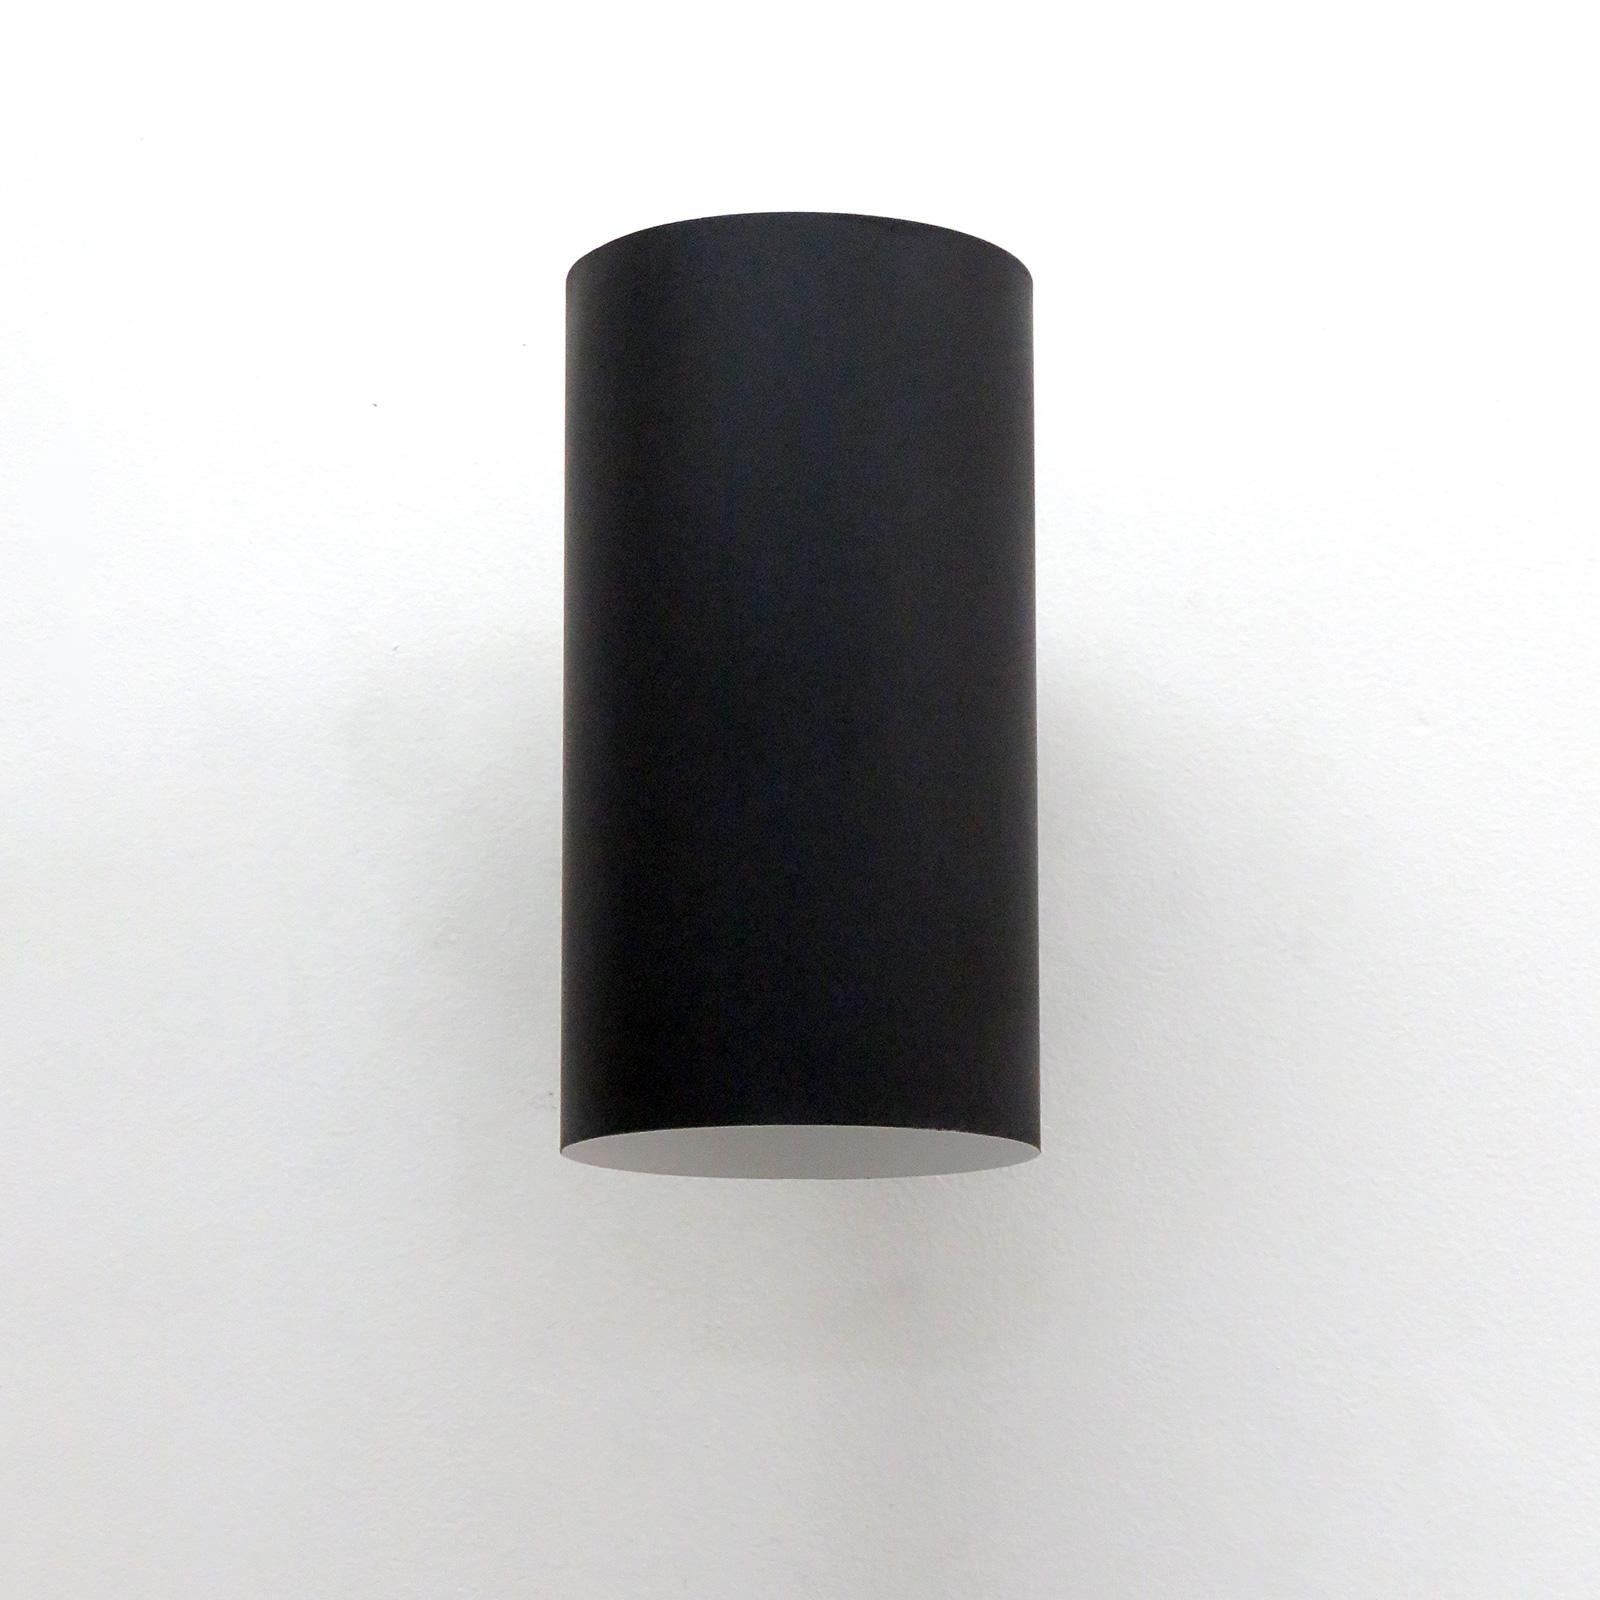 Elegant large cylindrical wall lights, model 71-474 by Ella & John Meiling for Louis Poulsen, 1970, in matte black finish, restored and wired for US standards, two E26 sockets per fixture, max. wattage 100w each, bulb provided as a onetime courtesy.